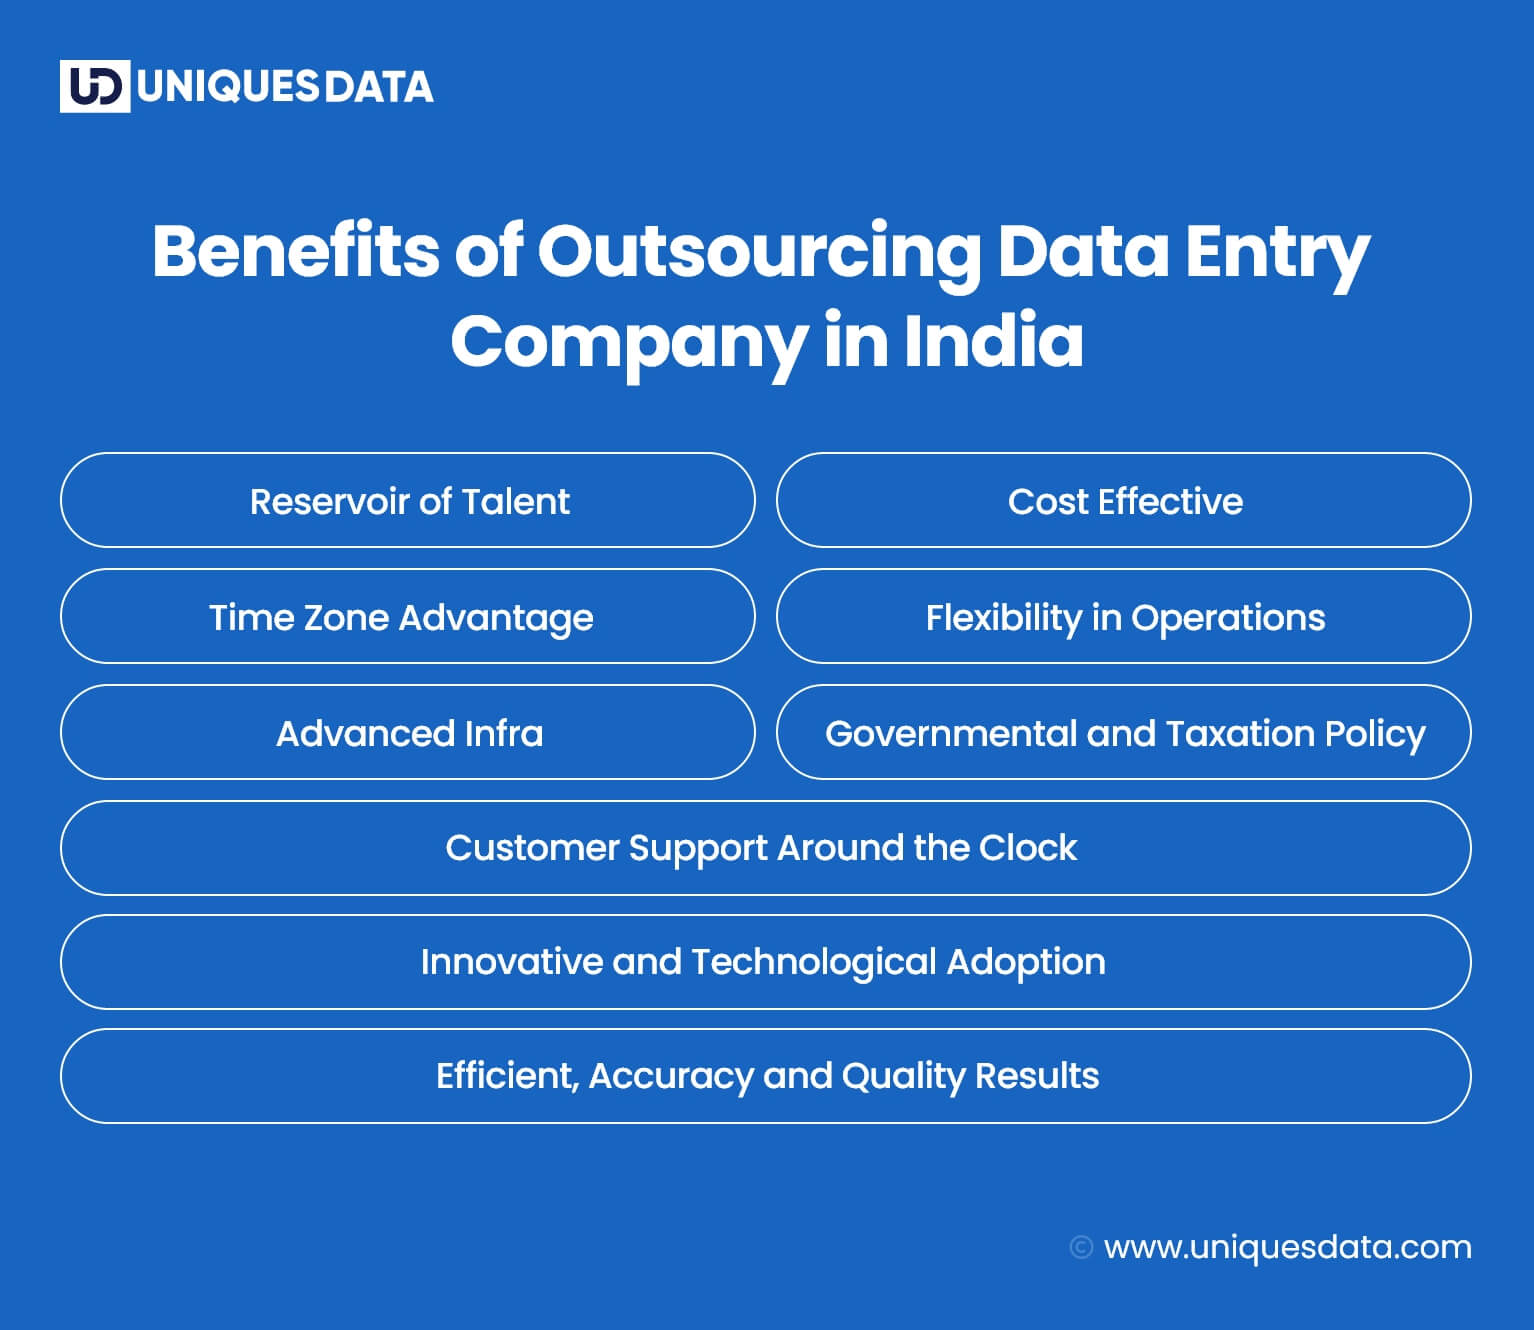 Benefits of Outsourcing Data Entry Company in India